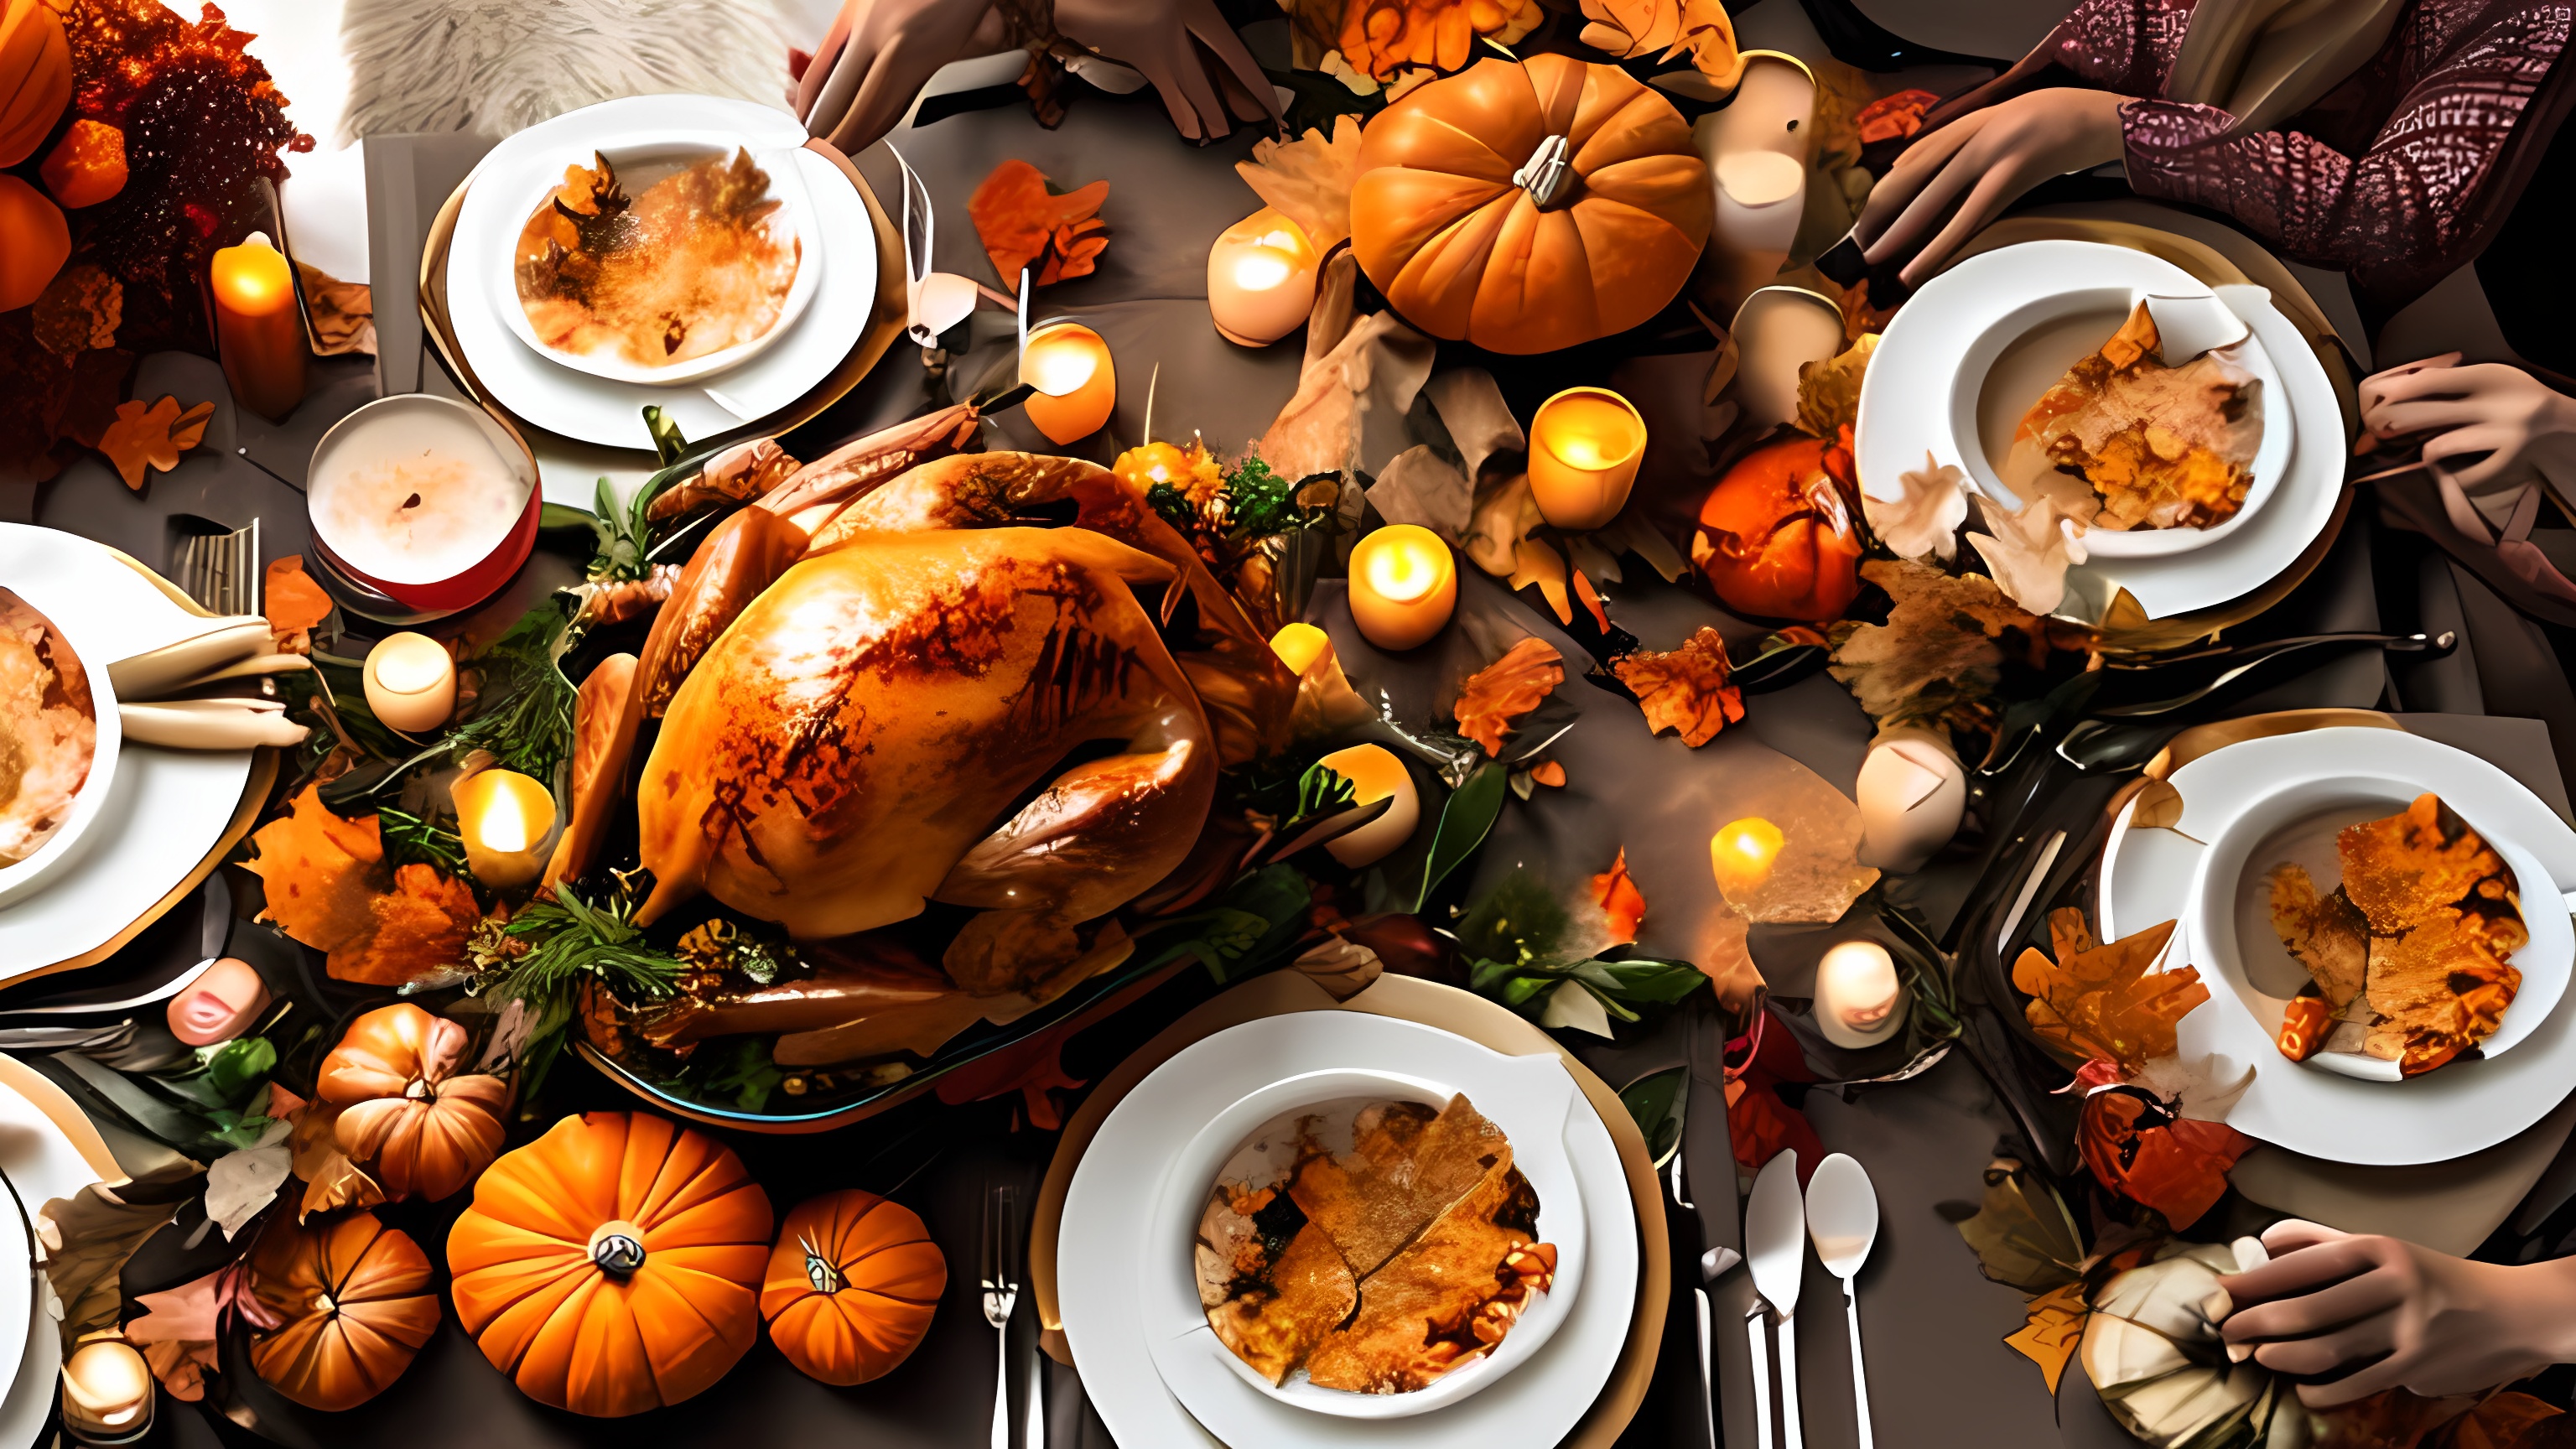 Thanksgiving email templates you can copy / paste